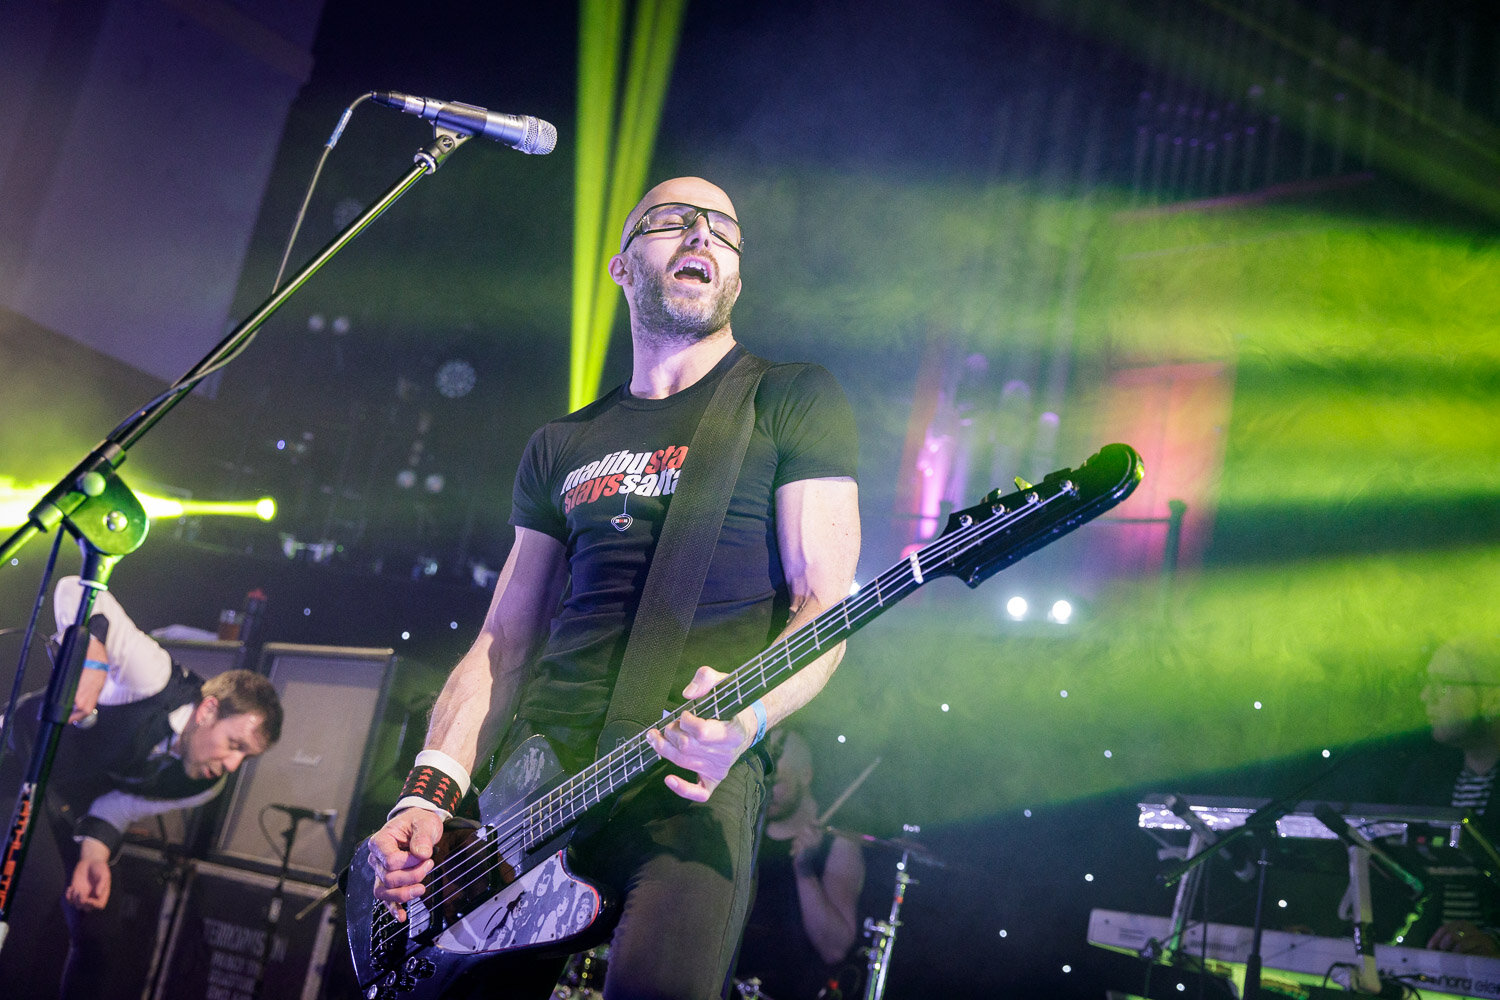 Terrorvision at Grand Central Hall in Liverpool on February 27th 2020